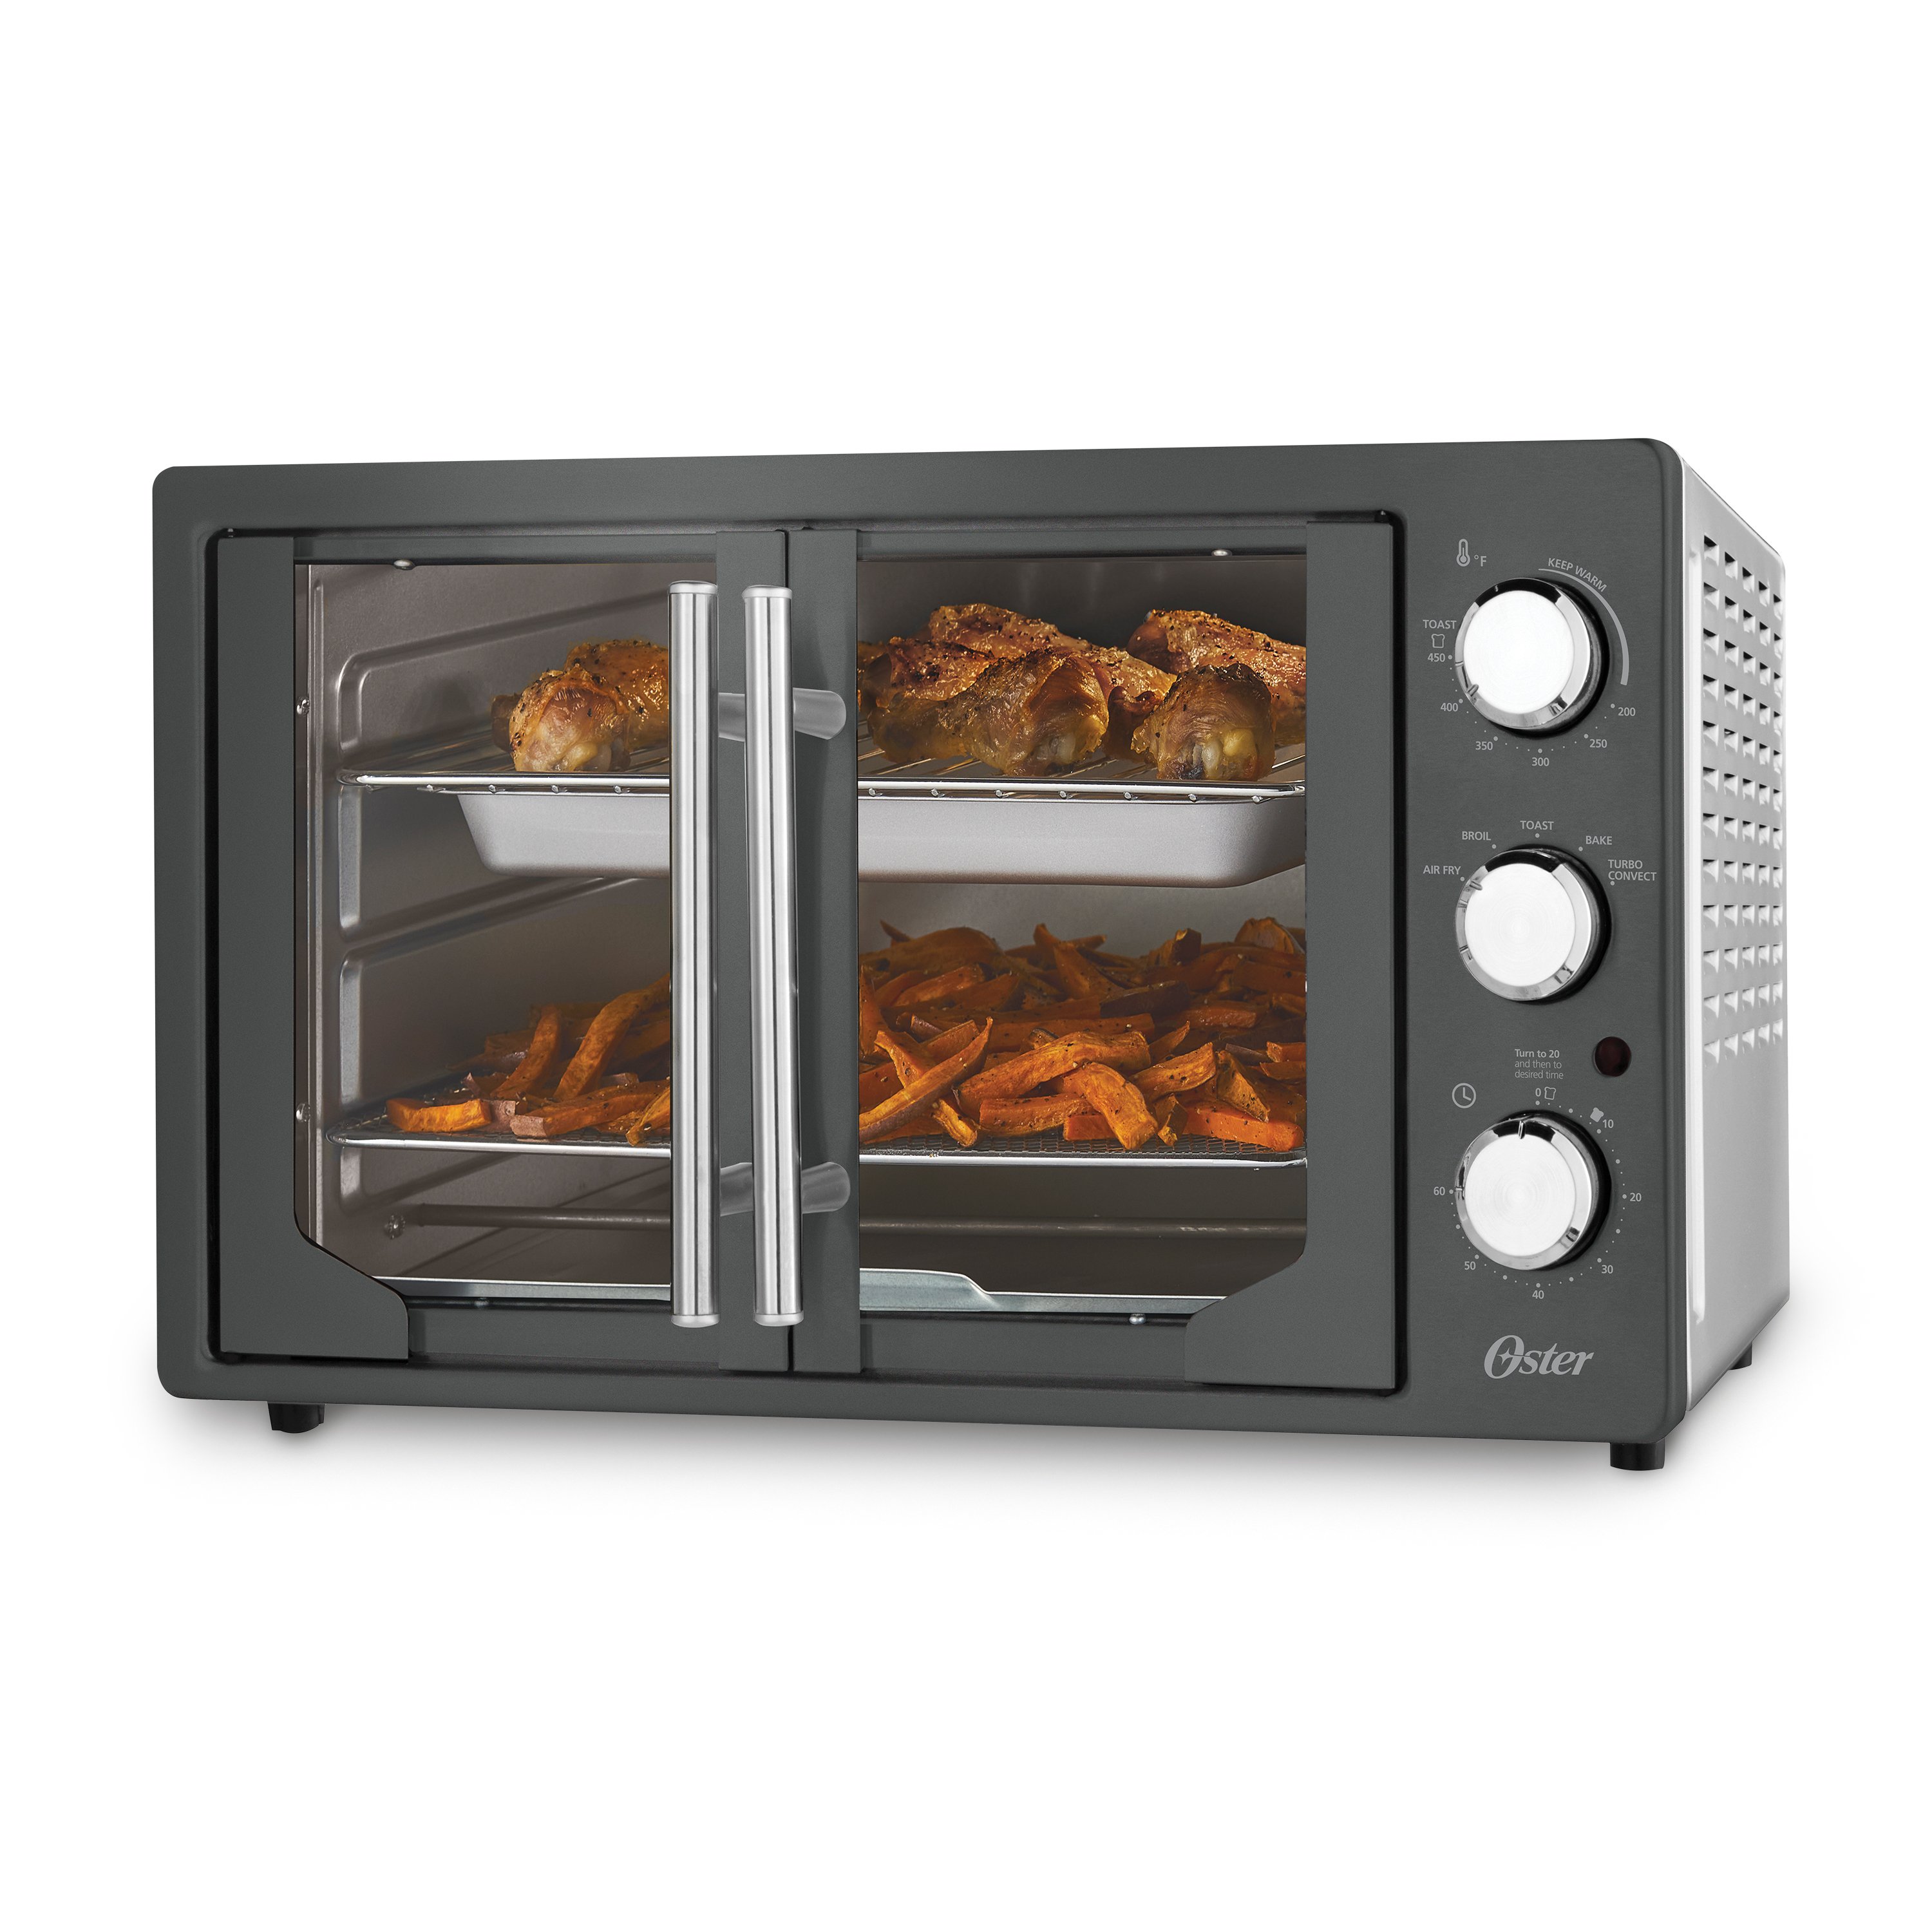 How to Use a Countertop Oven or Toaster Oven